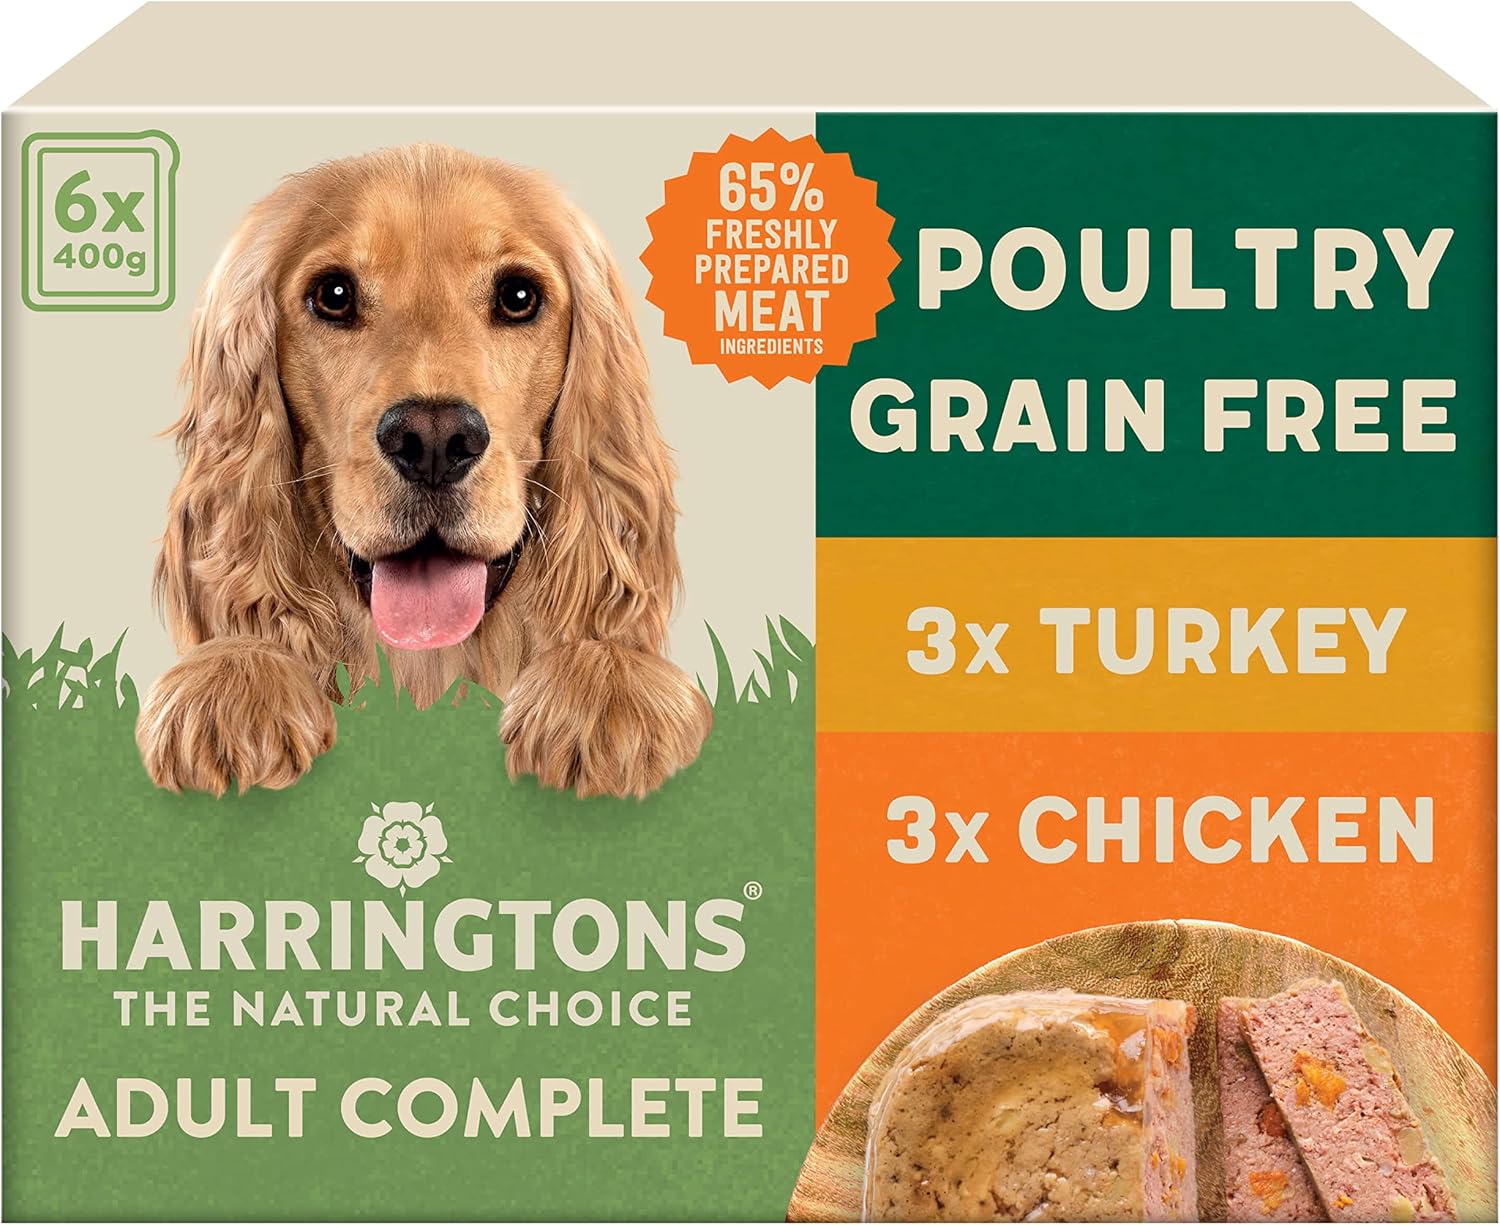 Harringtons Complete Wet Tray Grain Free Hypoallergenic Adult Dog Food Poultry Pack 6x400g - Turkey & Chicken - Made with All Natural Ingredients?HARRWP-C400